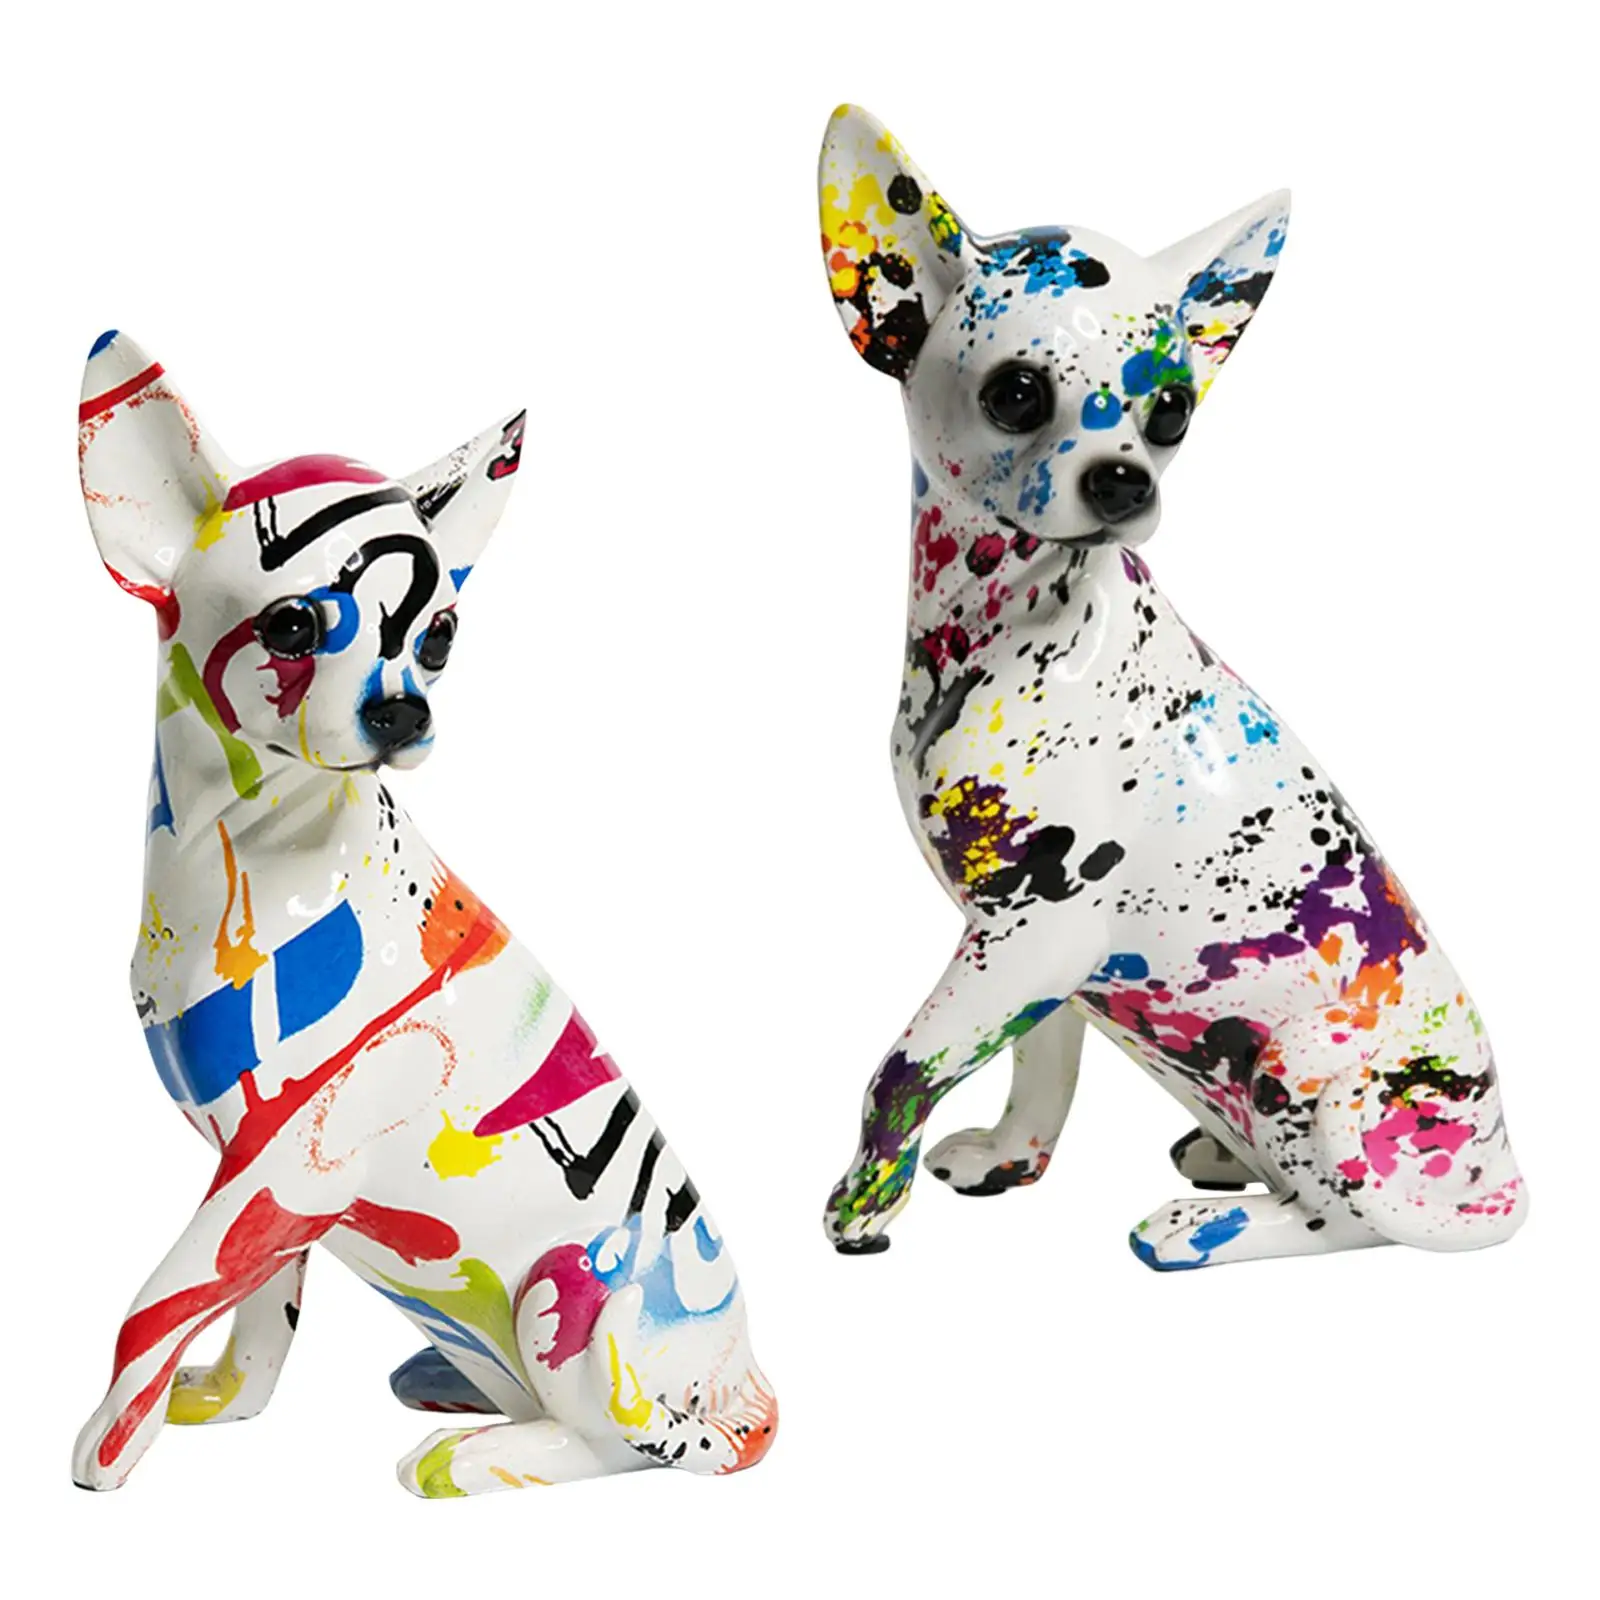 Creative Colorful Modern Graffiti Art Chihuahua Statue Art Figurine Resin Crafts for Living Room Home Decor Dog Lover Gift